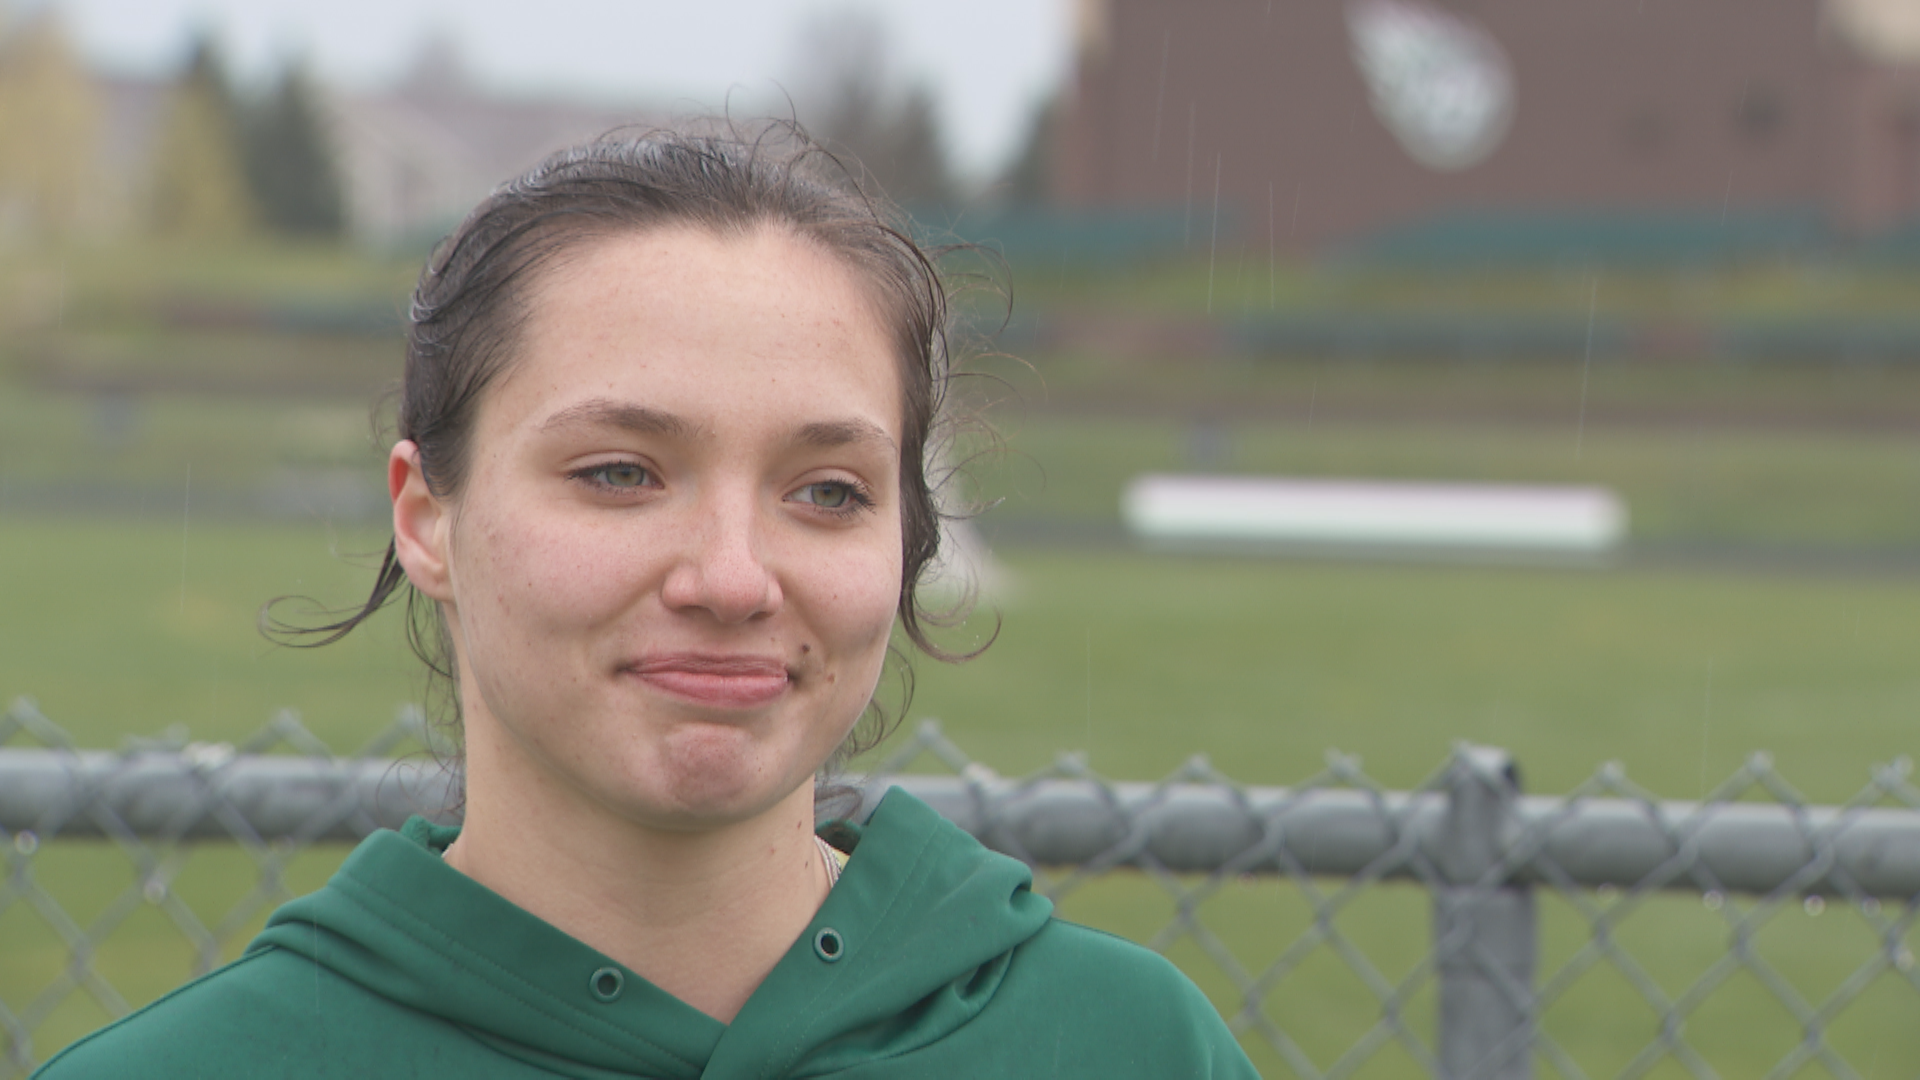 The Holy Family Catholic High School senior's versatility has been seen early this season as she's already broken two school records.